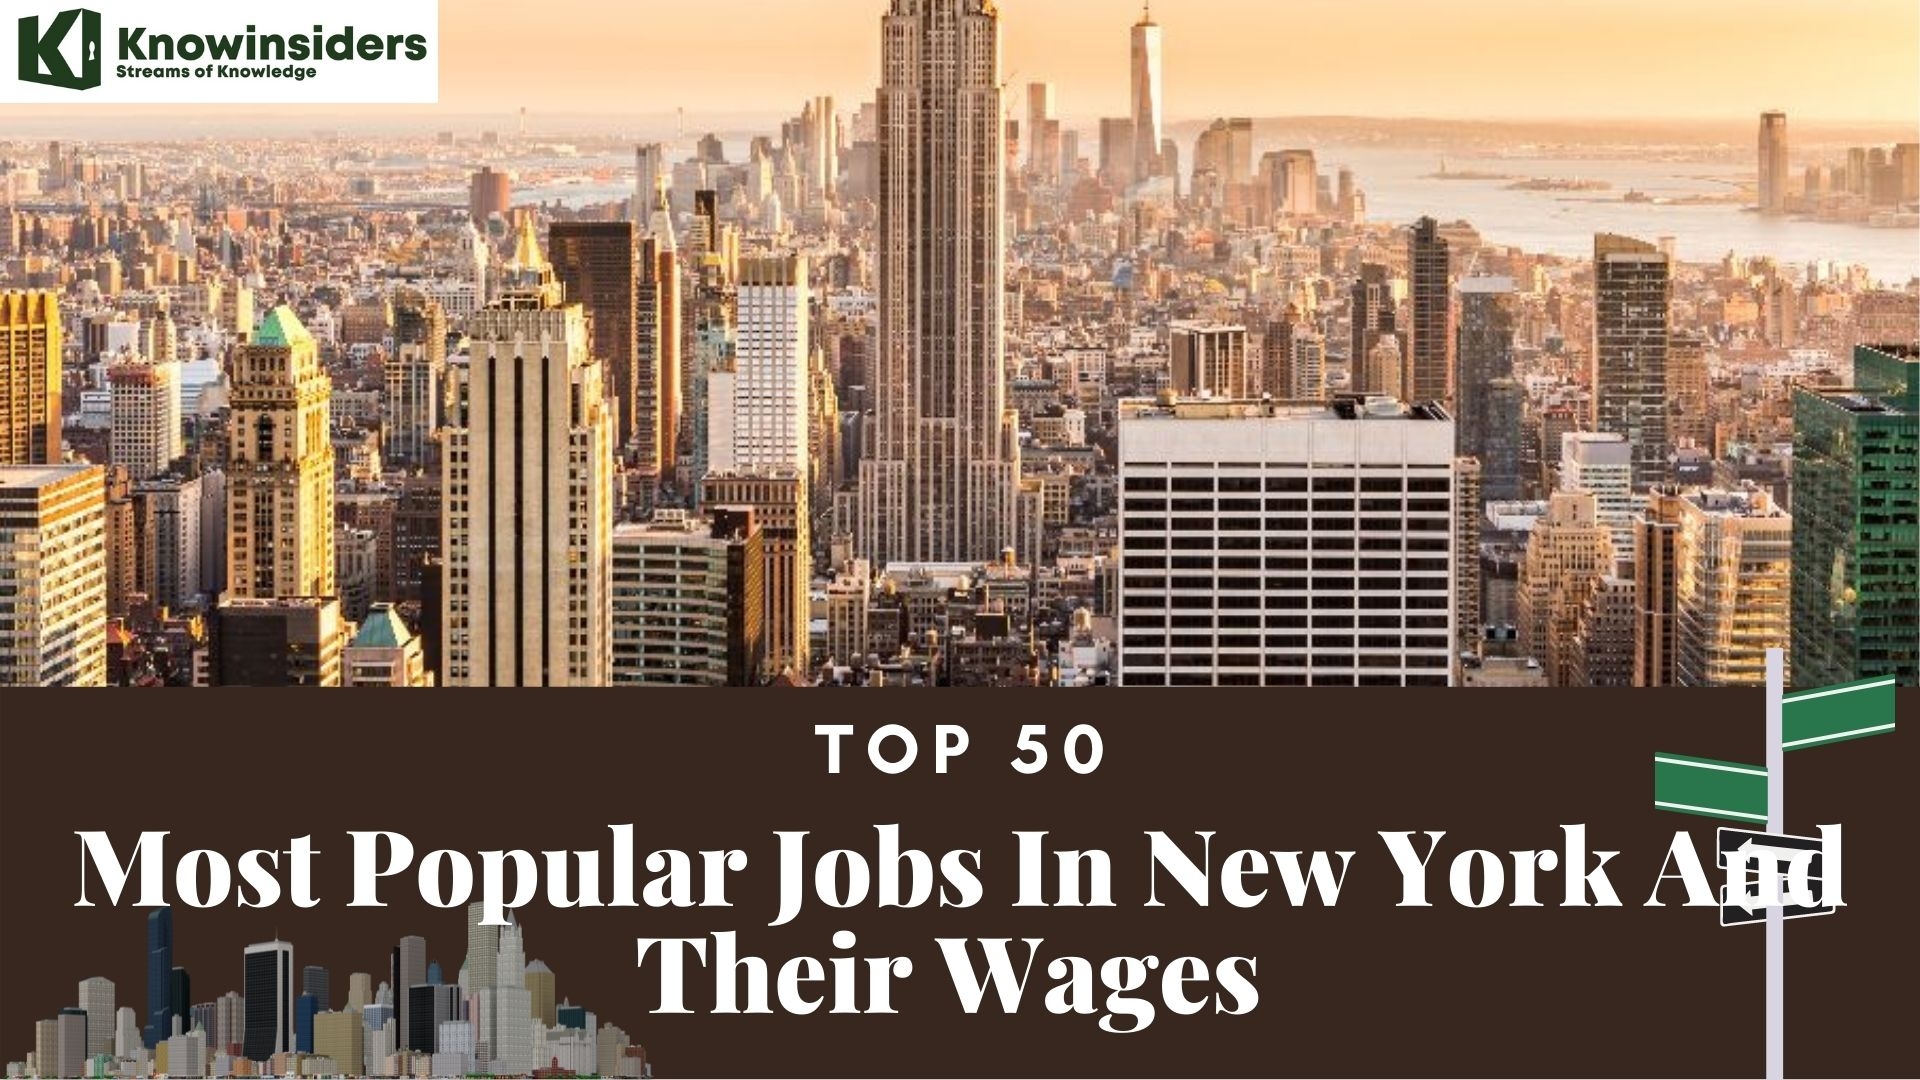 Top 50 Most Popular Jobs And Their Wages - How To Get A Job